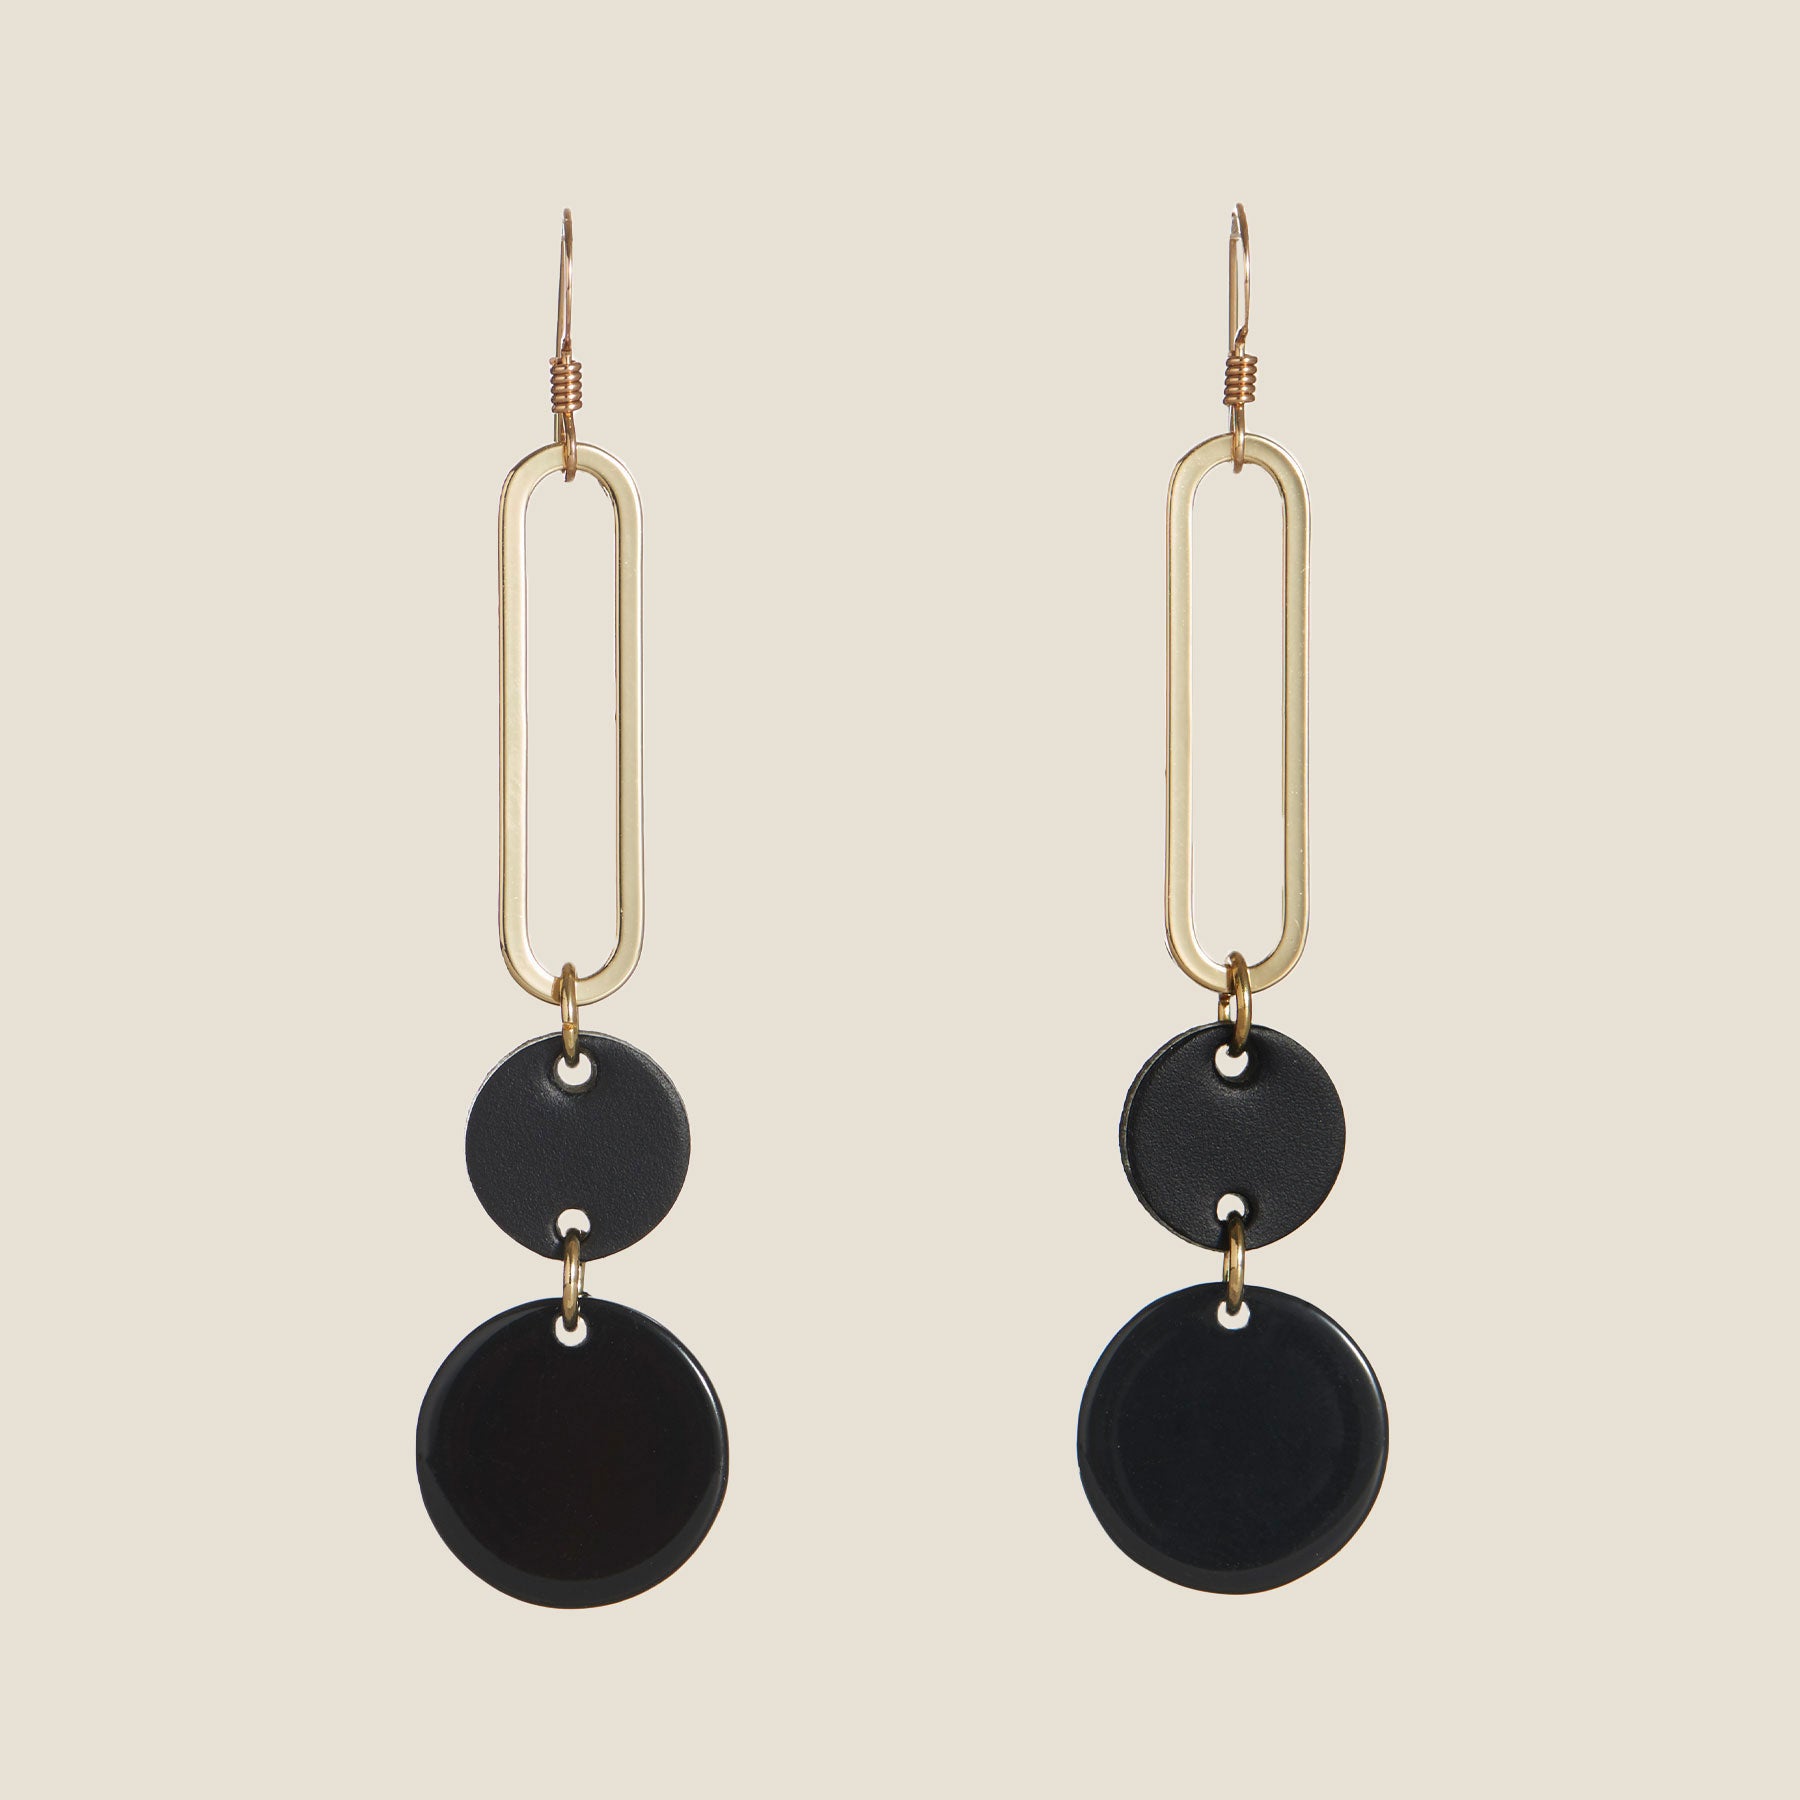 Black Icon | Lightweight Leather Earrings | Nickel & Suede - Nickel and Suede